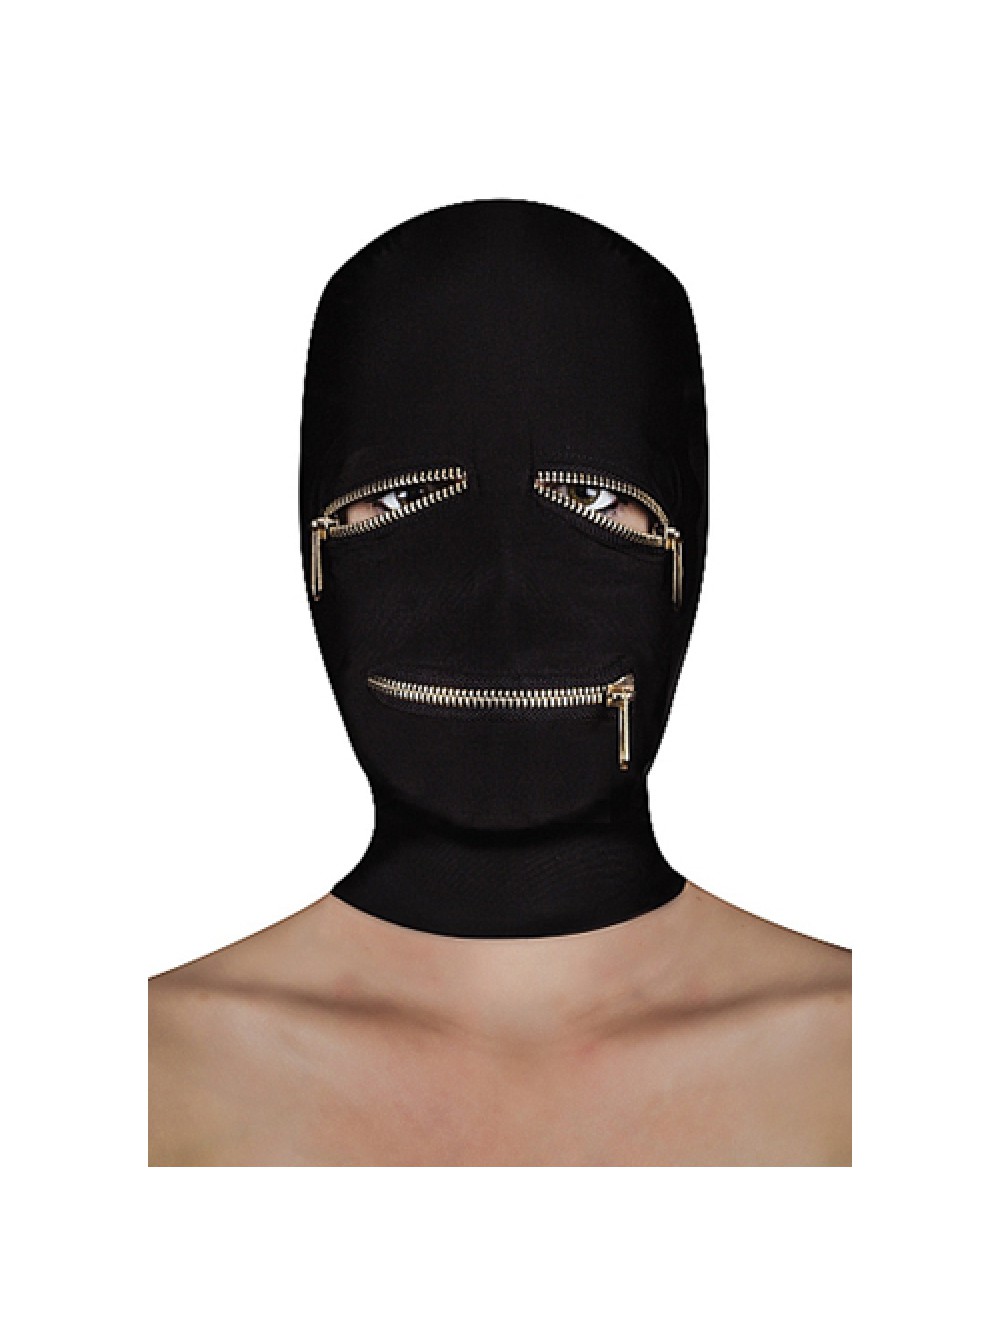 Extreme Zipper Mask with Eye and Mouth Zipper 8714273581501